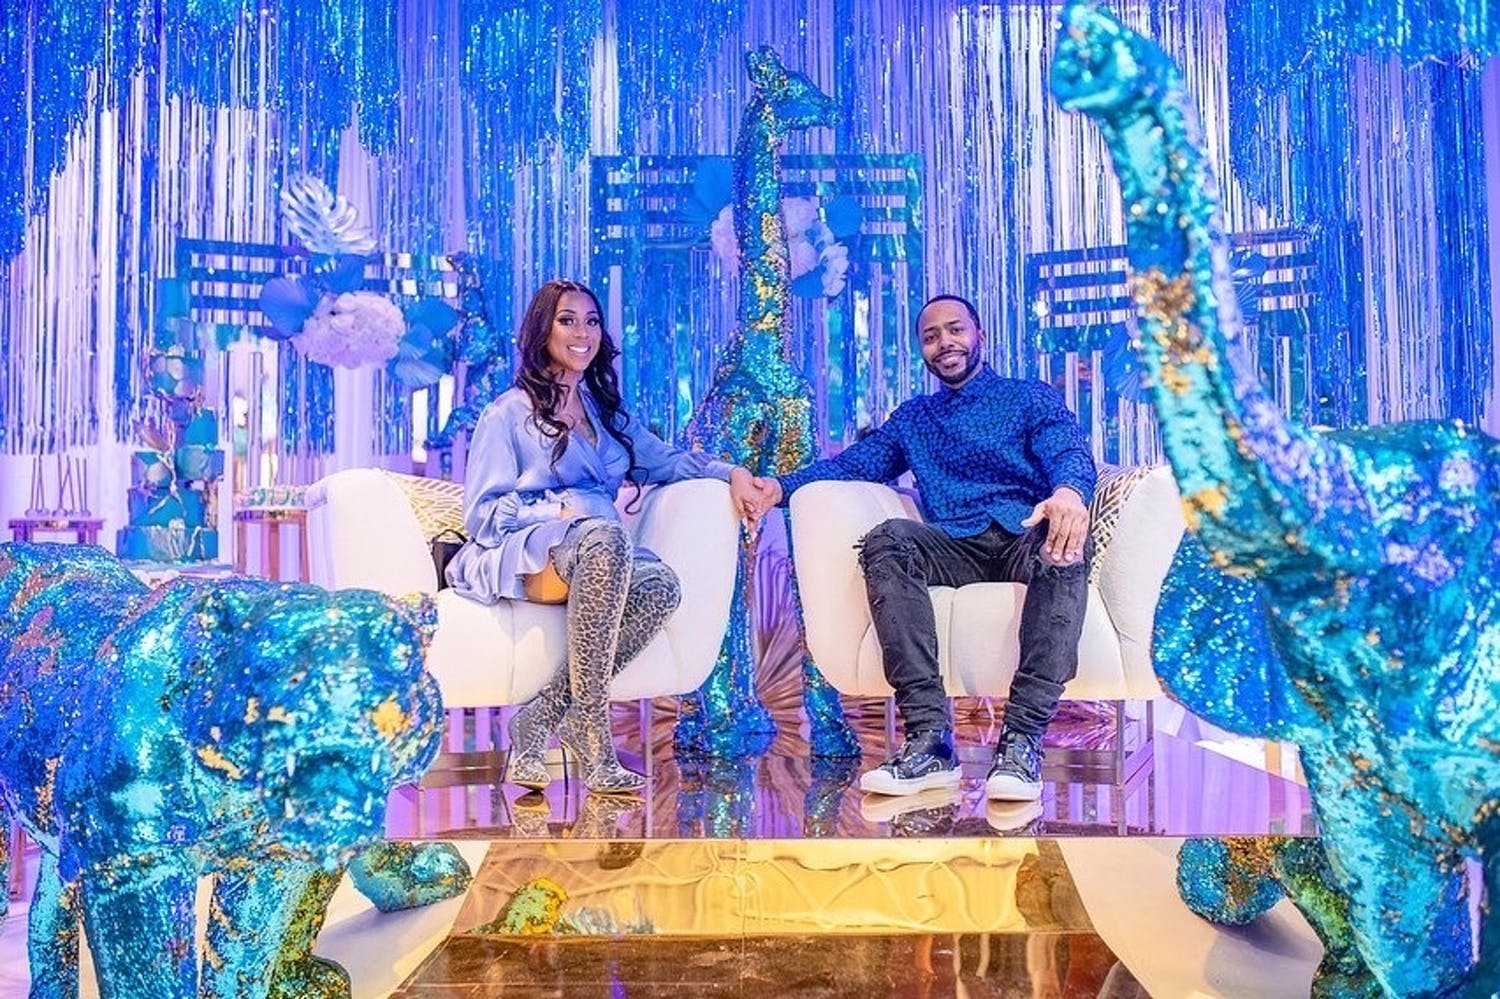 Parents-to-Be Sit on White Chairs Against Iridescent Backdrop and Glittery Blue Animal Sculptures | PartySlate